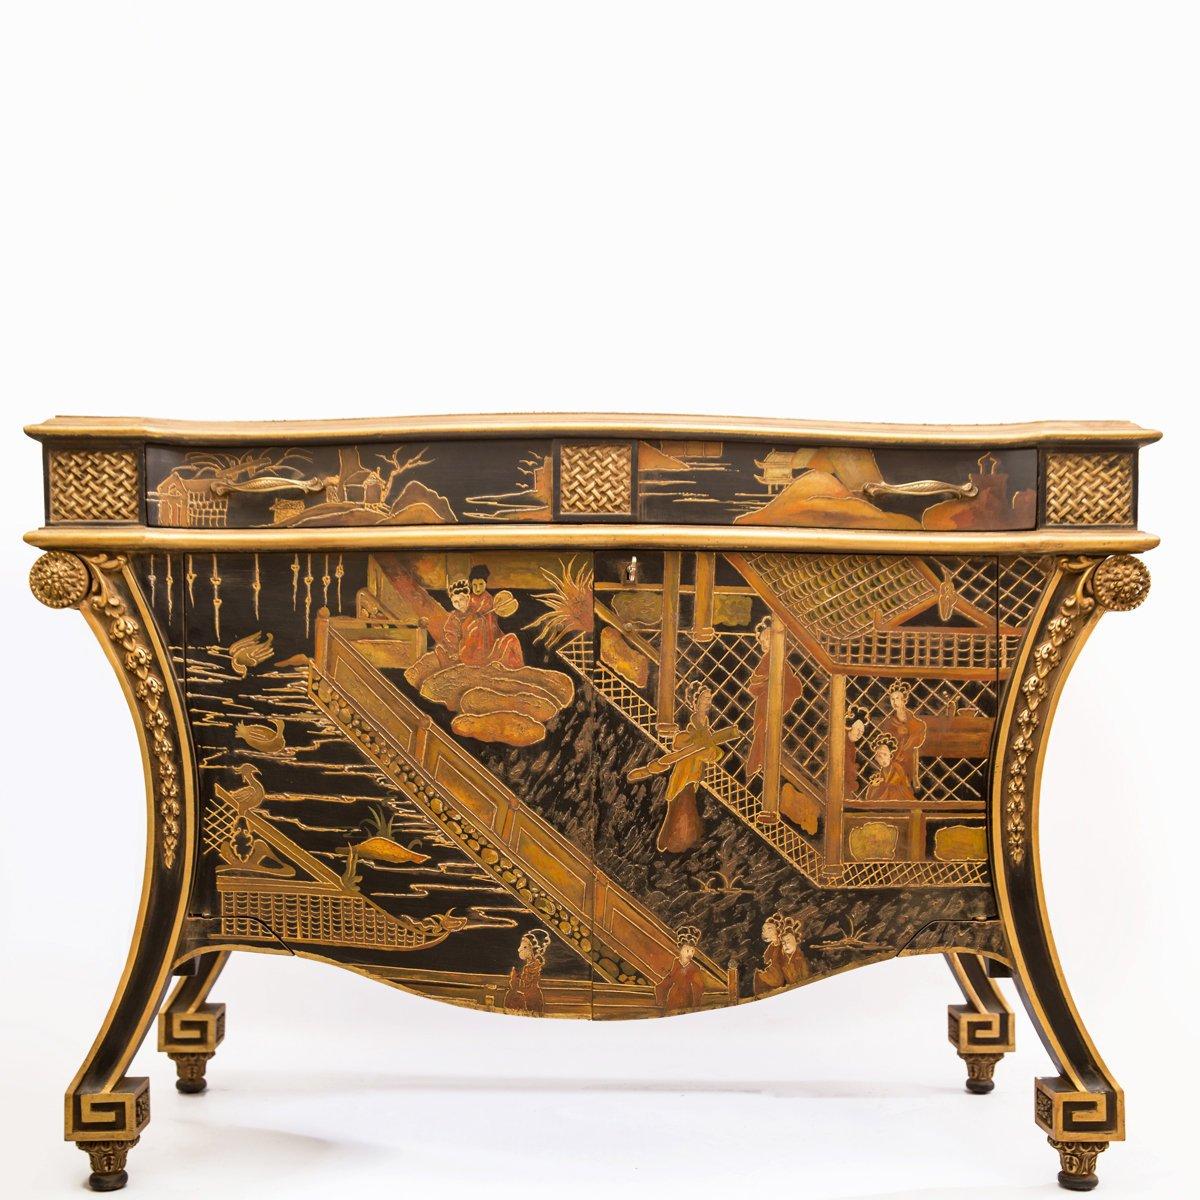 The Chinese-style commode was inspired by the Chinese style in the 18th century. This style is known that it has the most luxurious pieces. The commode is fully made of natural beechwood and covered with natural wood veneer. The commode is